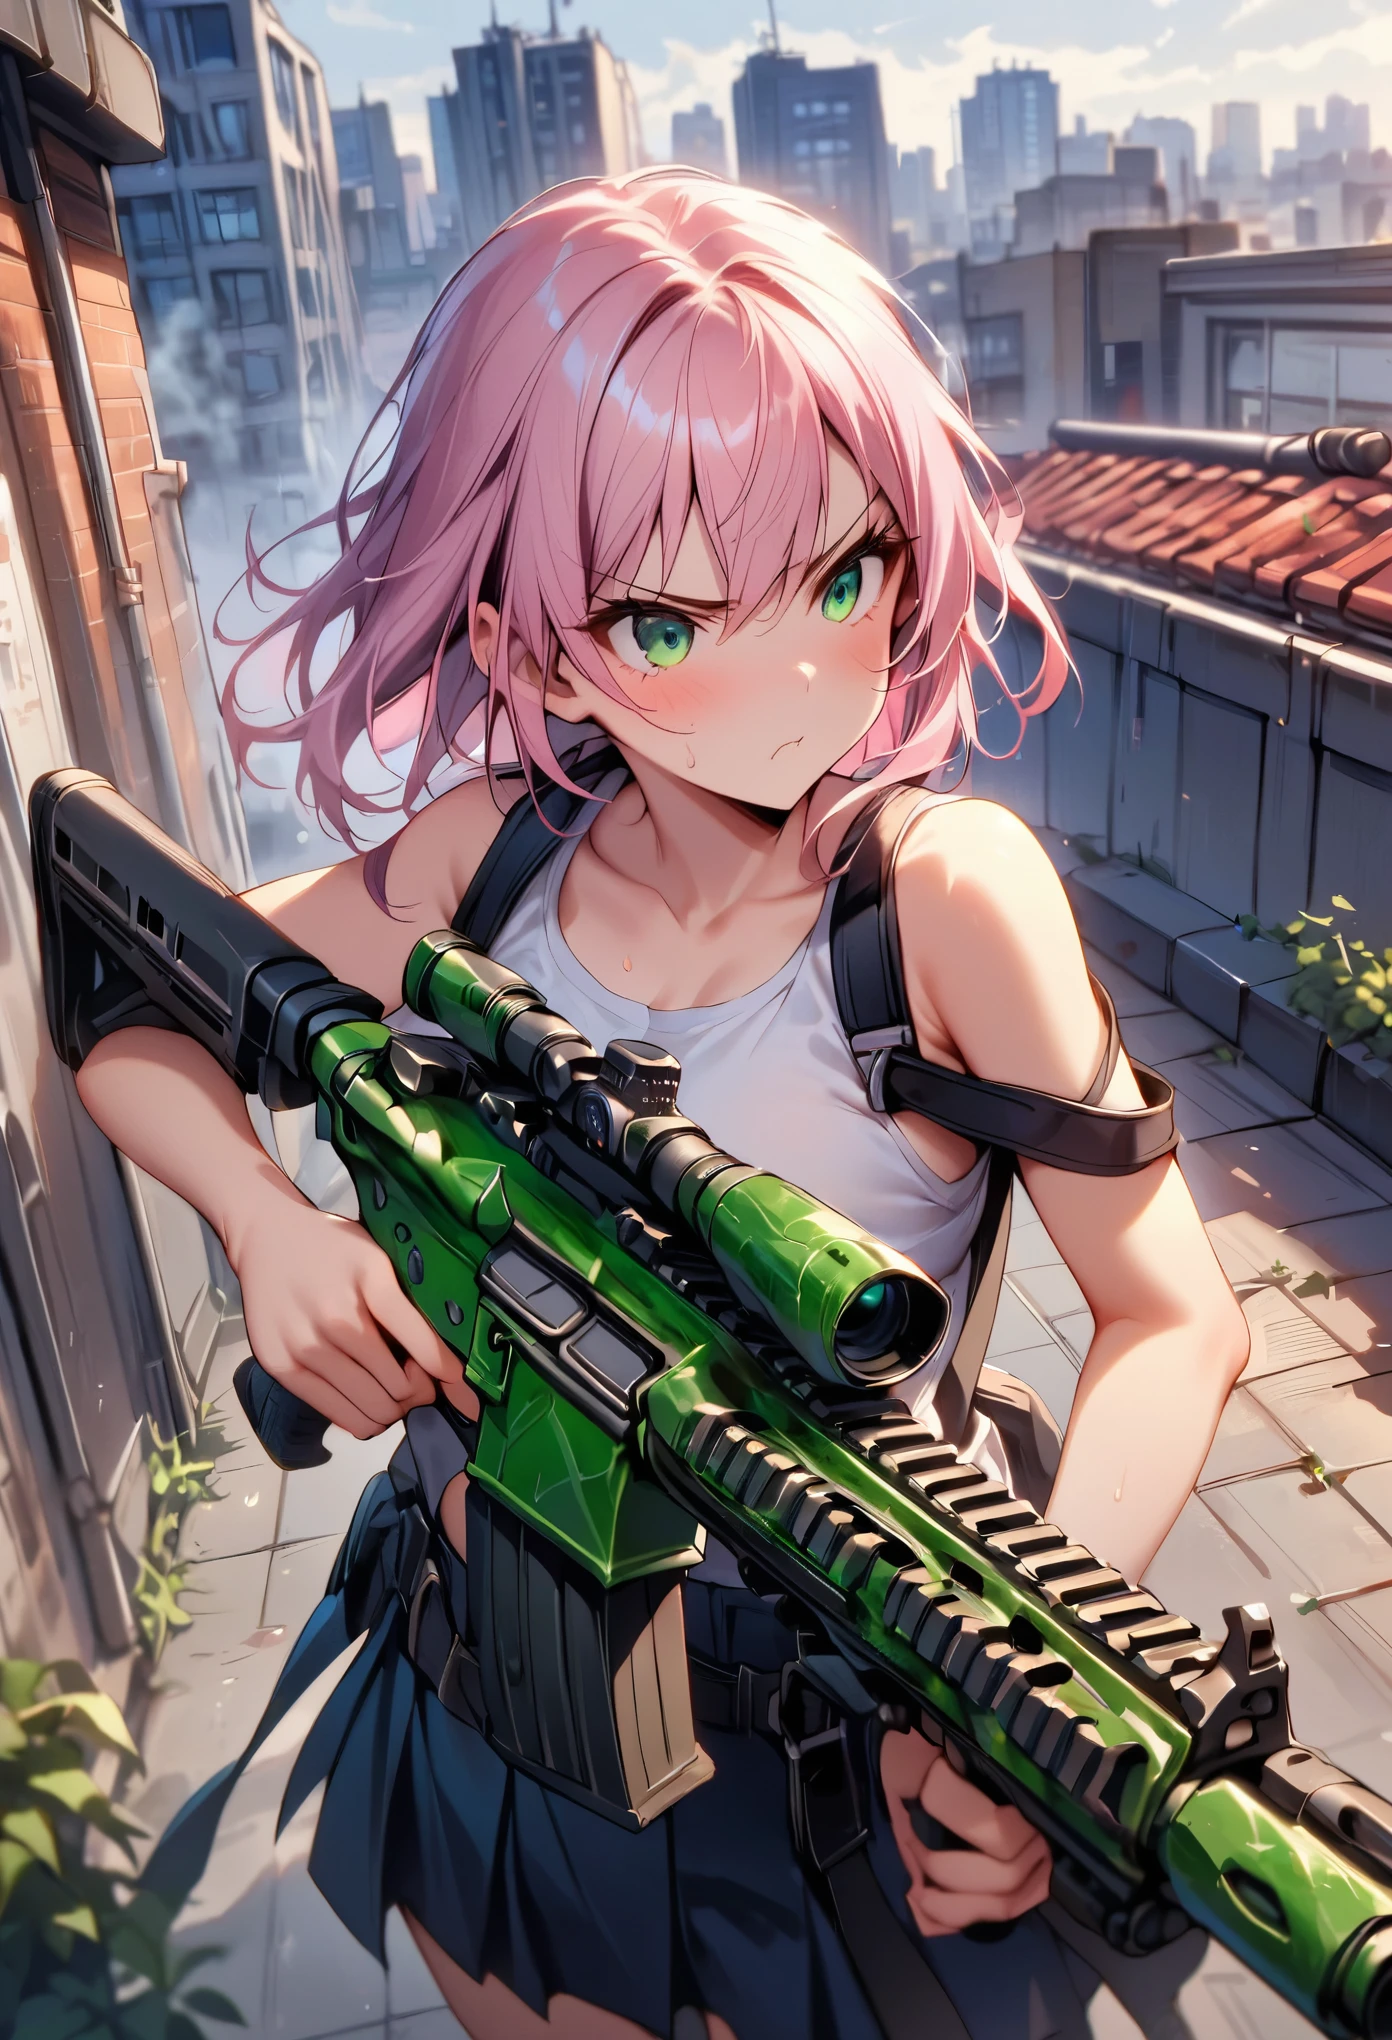 A woman holding a rifle in her hands on a rooftop - SeaArt AI